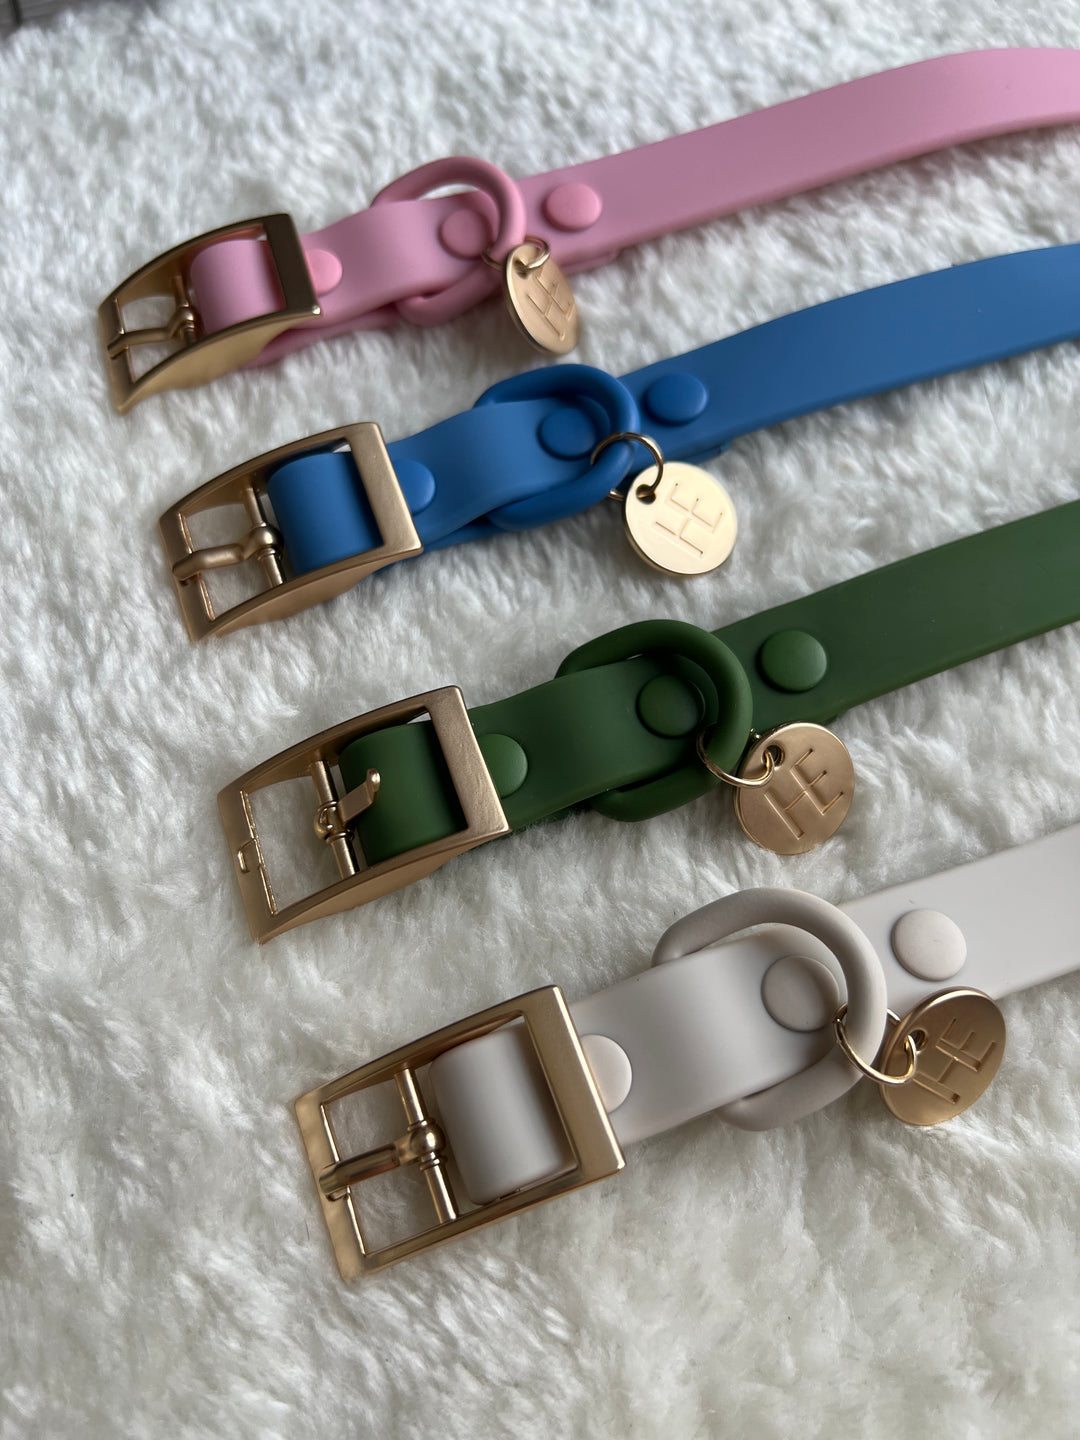 Forest Green 'All Weather' Dog Collar